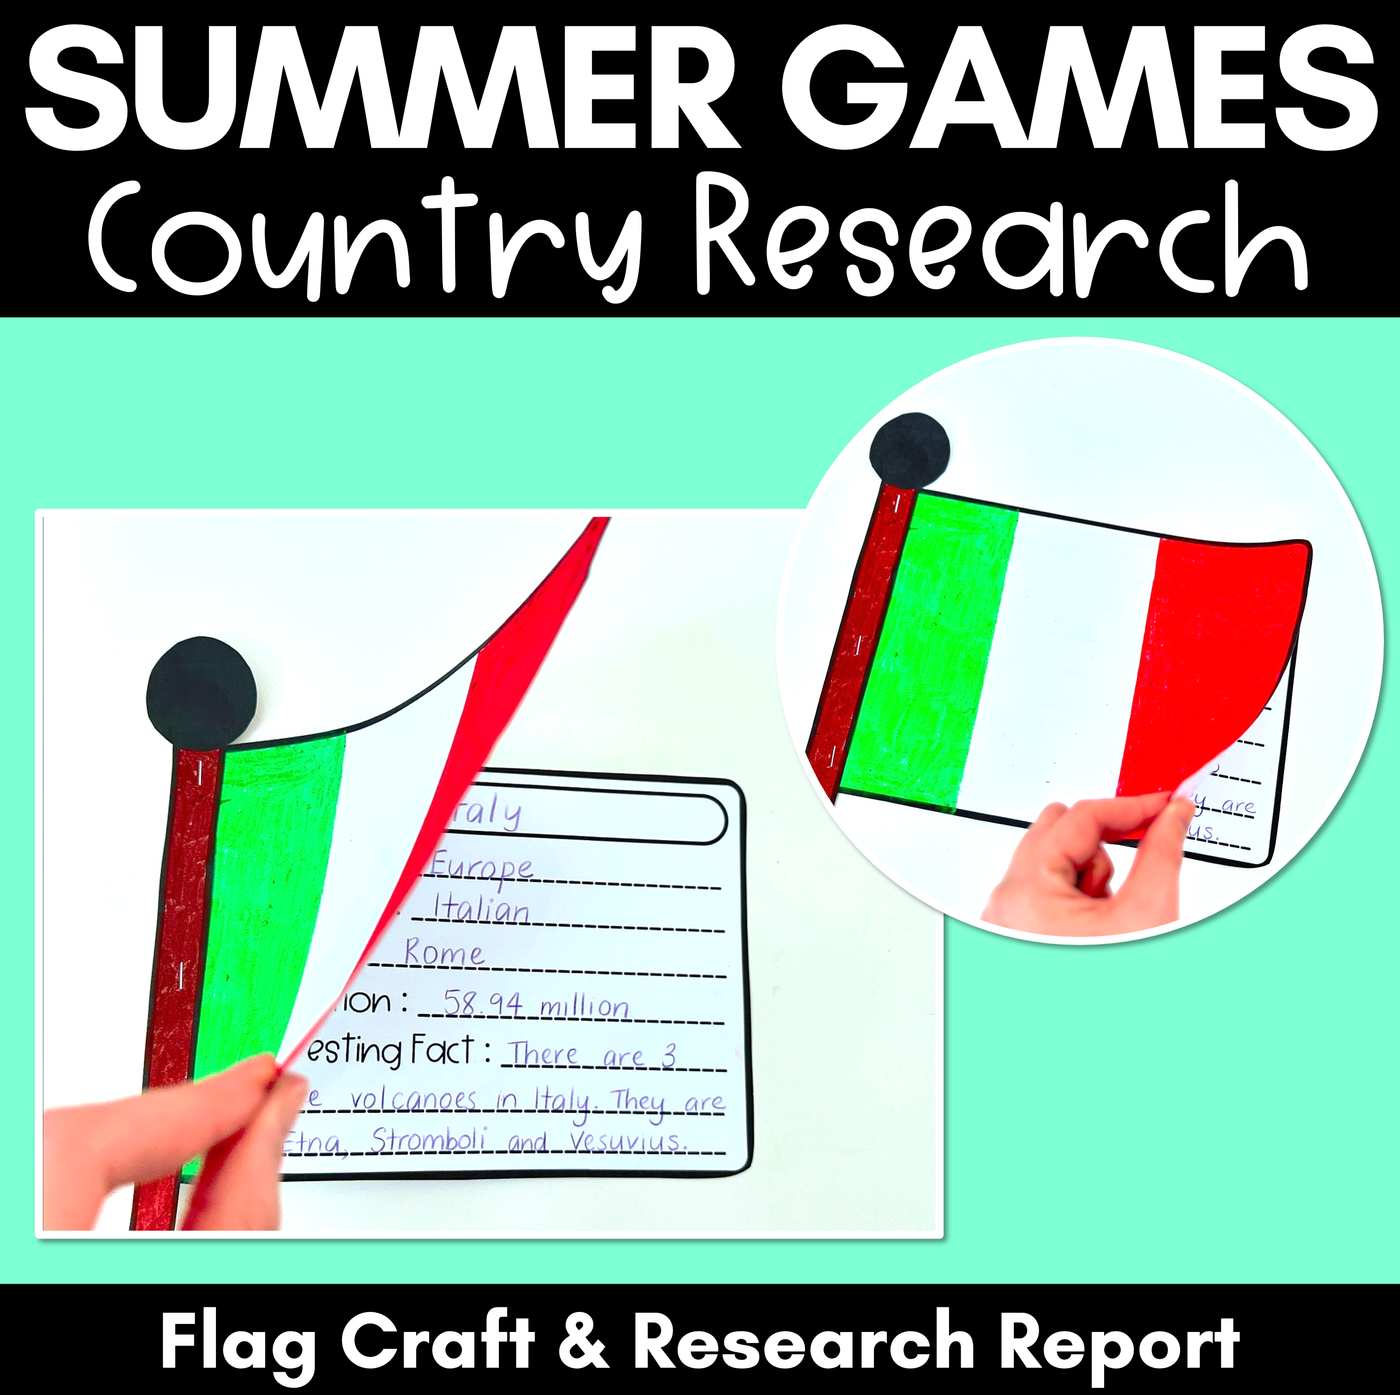 Summer Games Country Research Activity - Flag Craft and Research Report